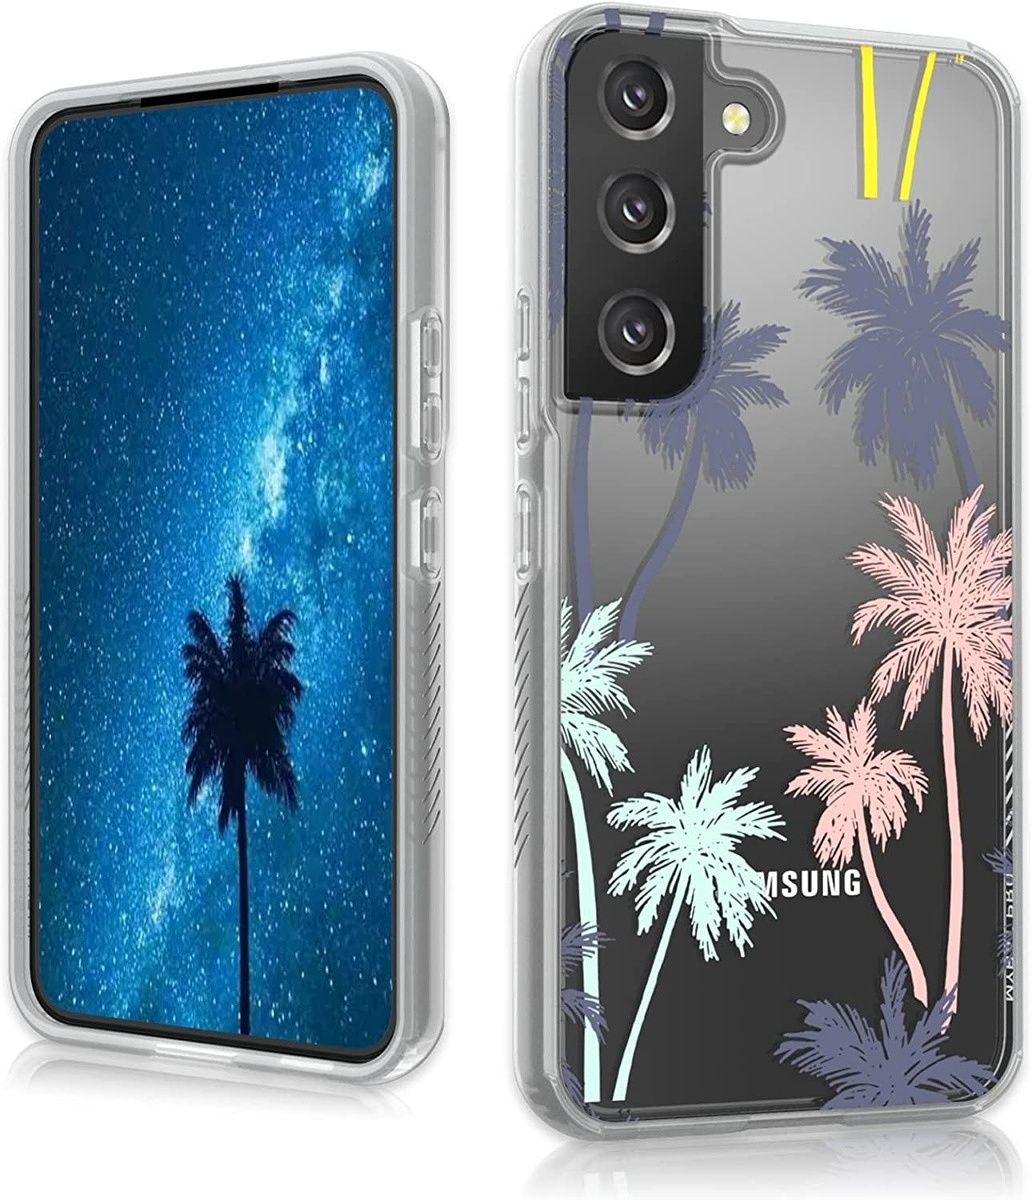 This minimalistic case has a hard, clear build, featuring a palm trees print. It's solid, stylish, and has a lifetime warranty.